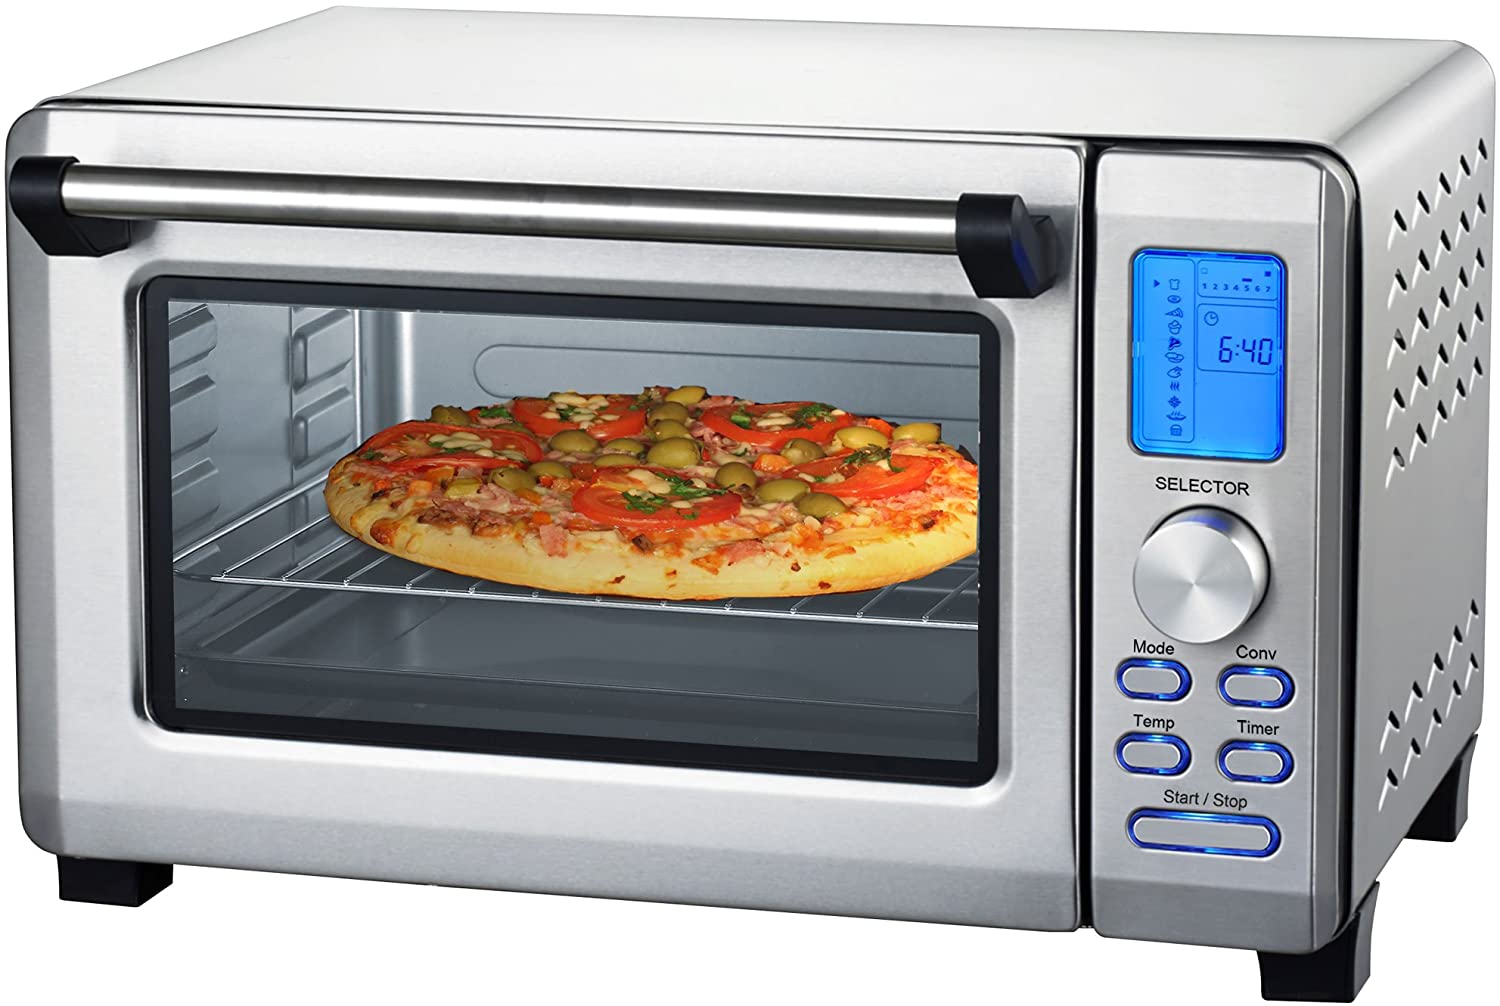 Syntrox Germany 23 Litre Digital Stainless Steel Mini Stand Oven with Convection and Rotisserie Mini Oven Pizza Oven